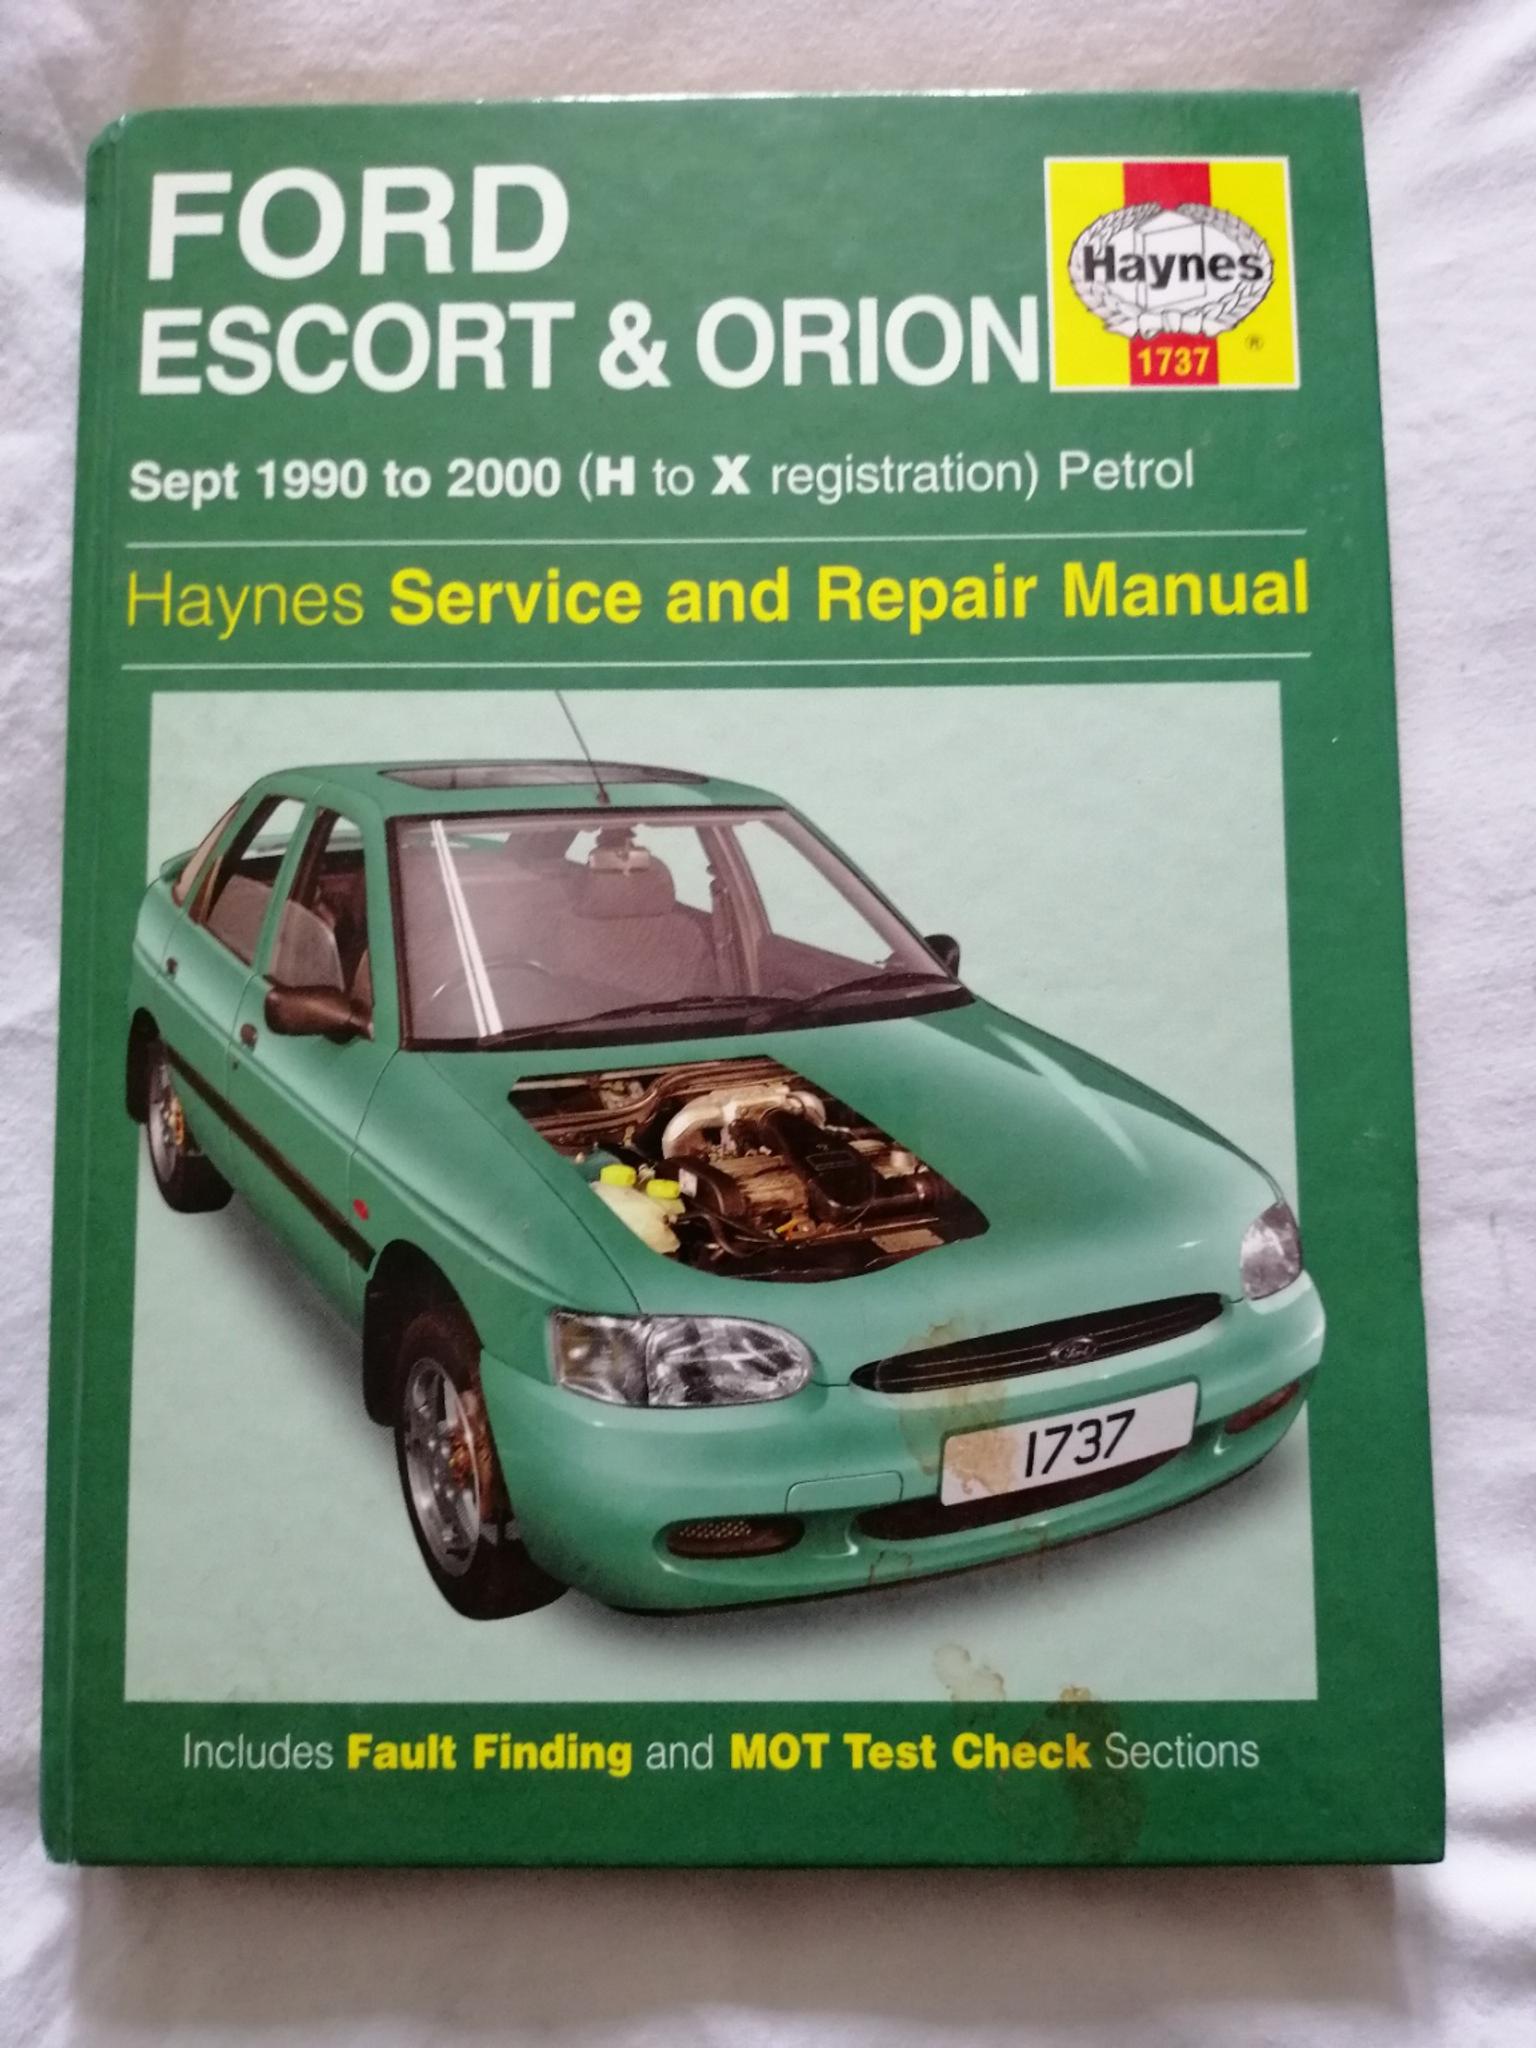 hayens free escort ford manual for